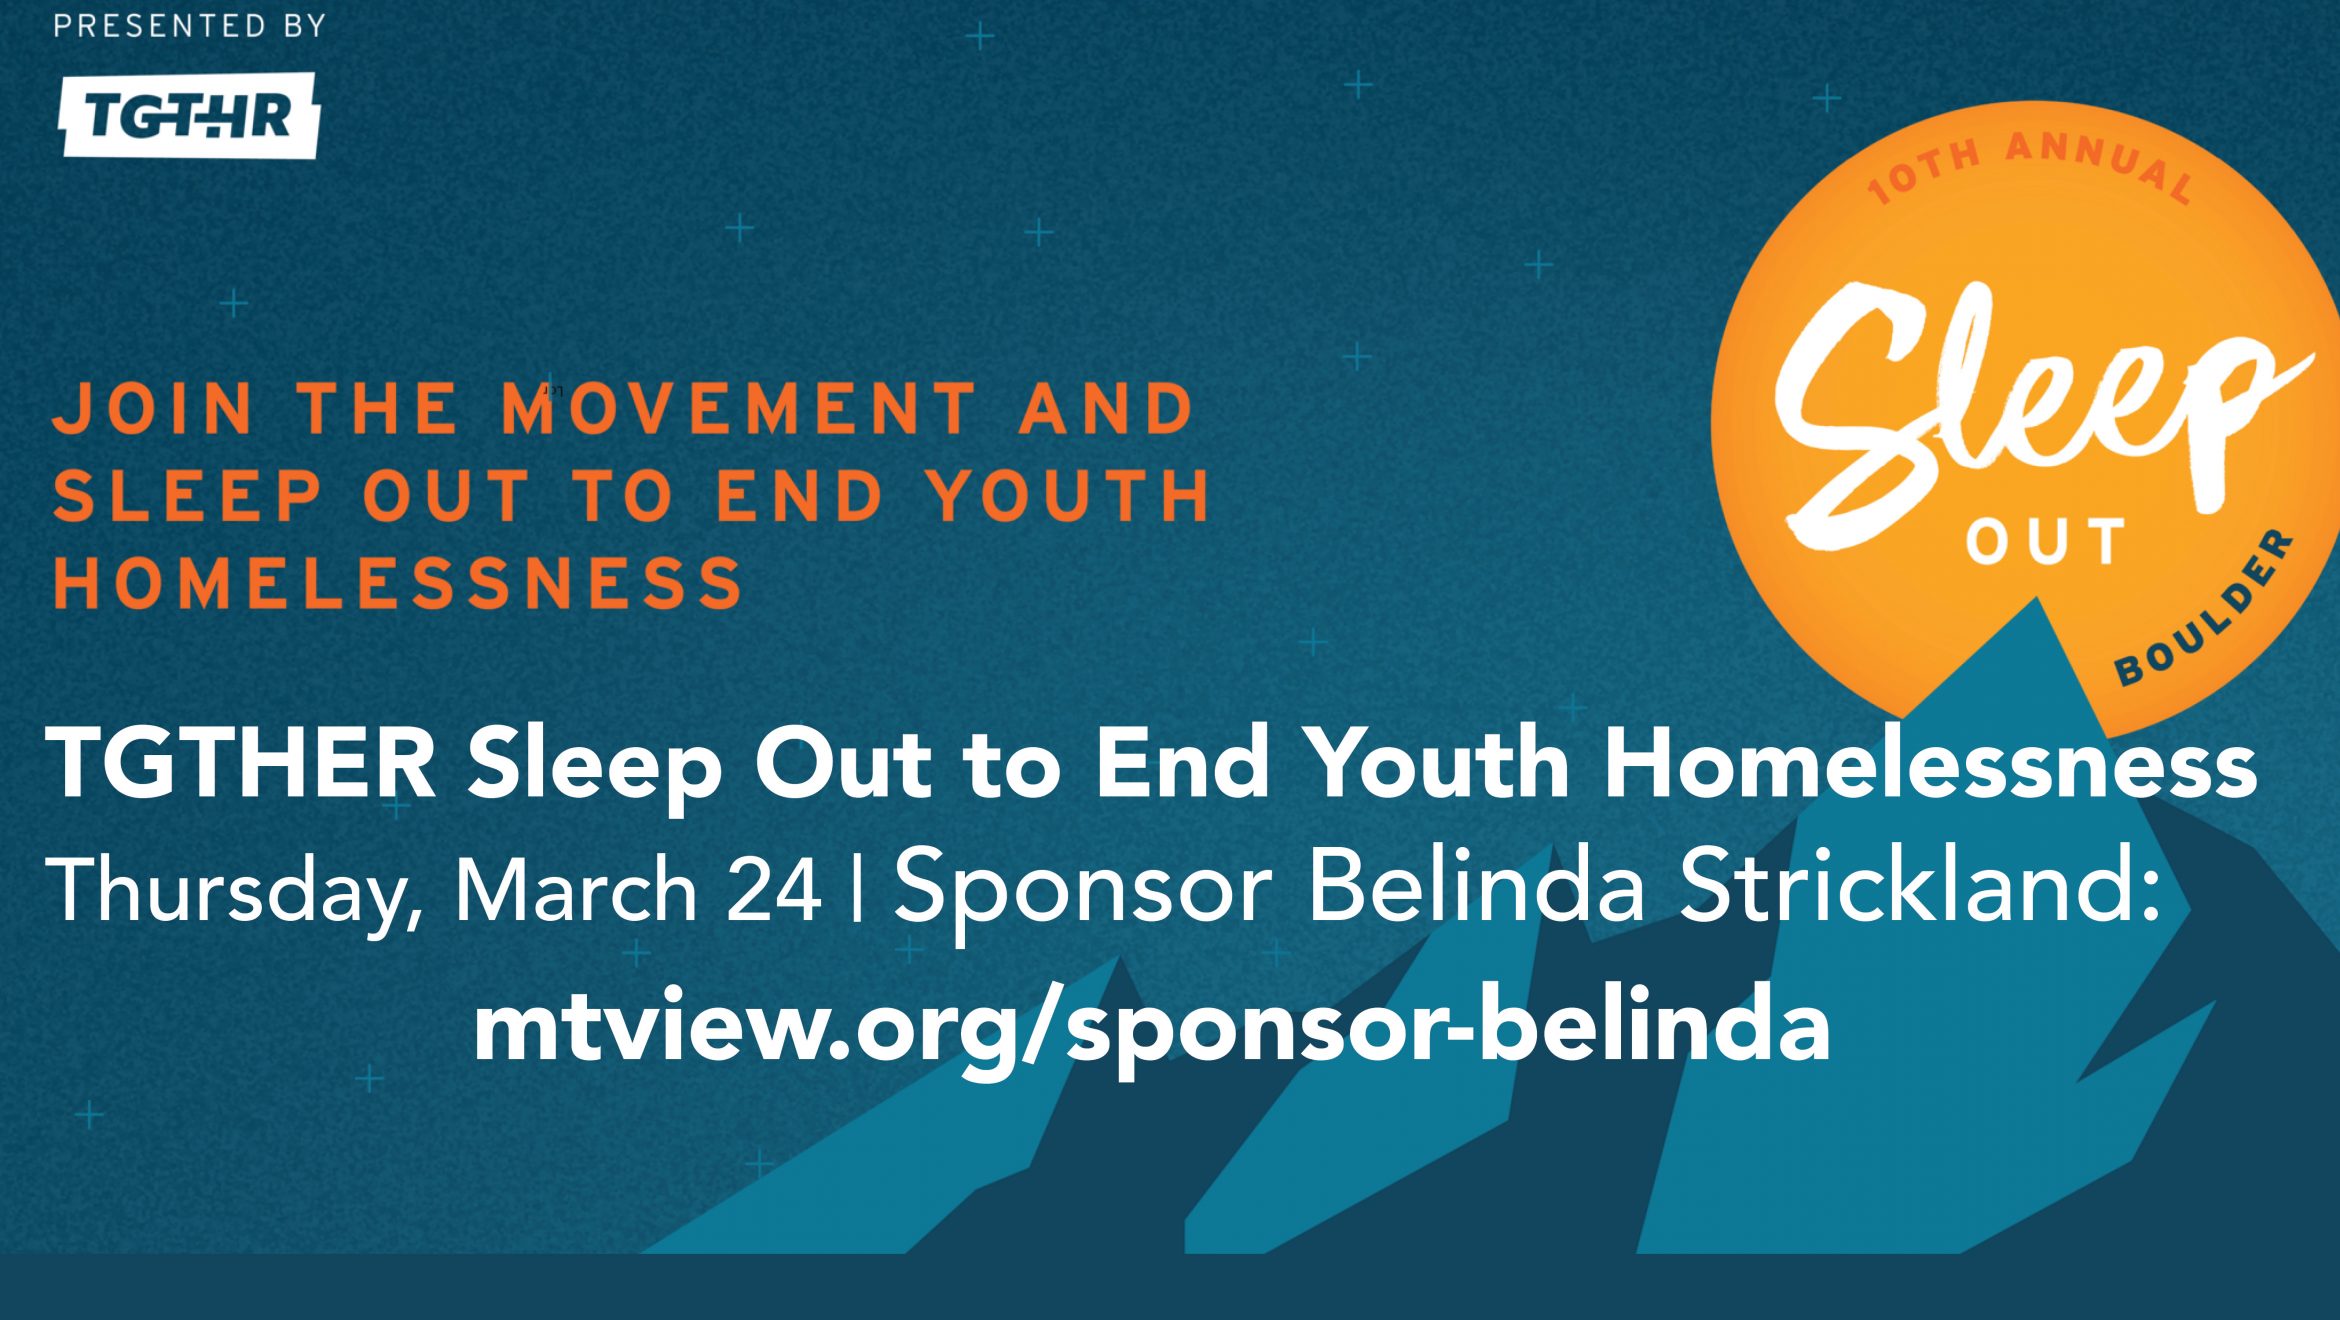 Sponsor Belinda in a Sleep Out to End Youth Homelessness